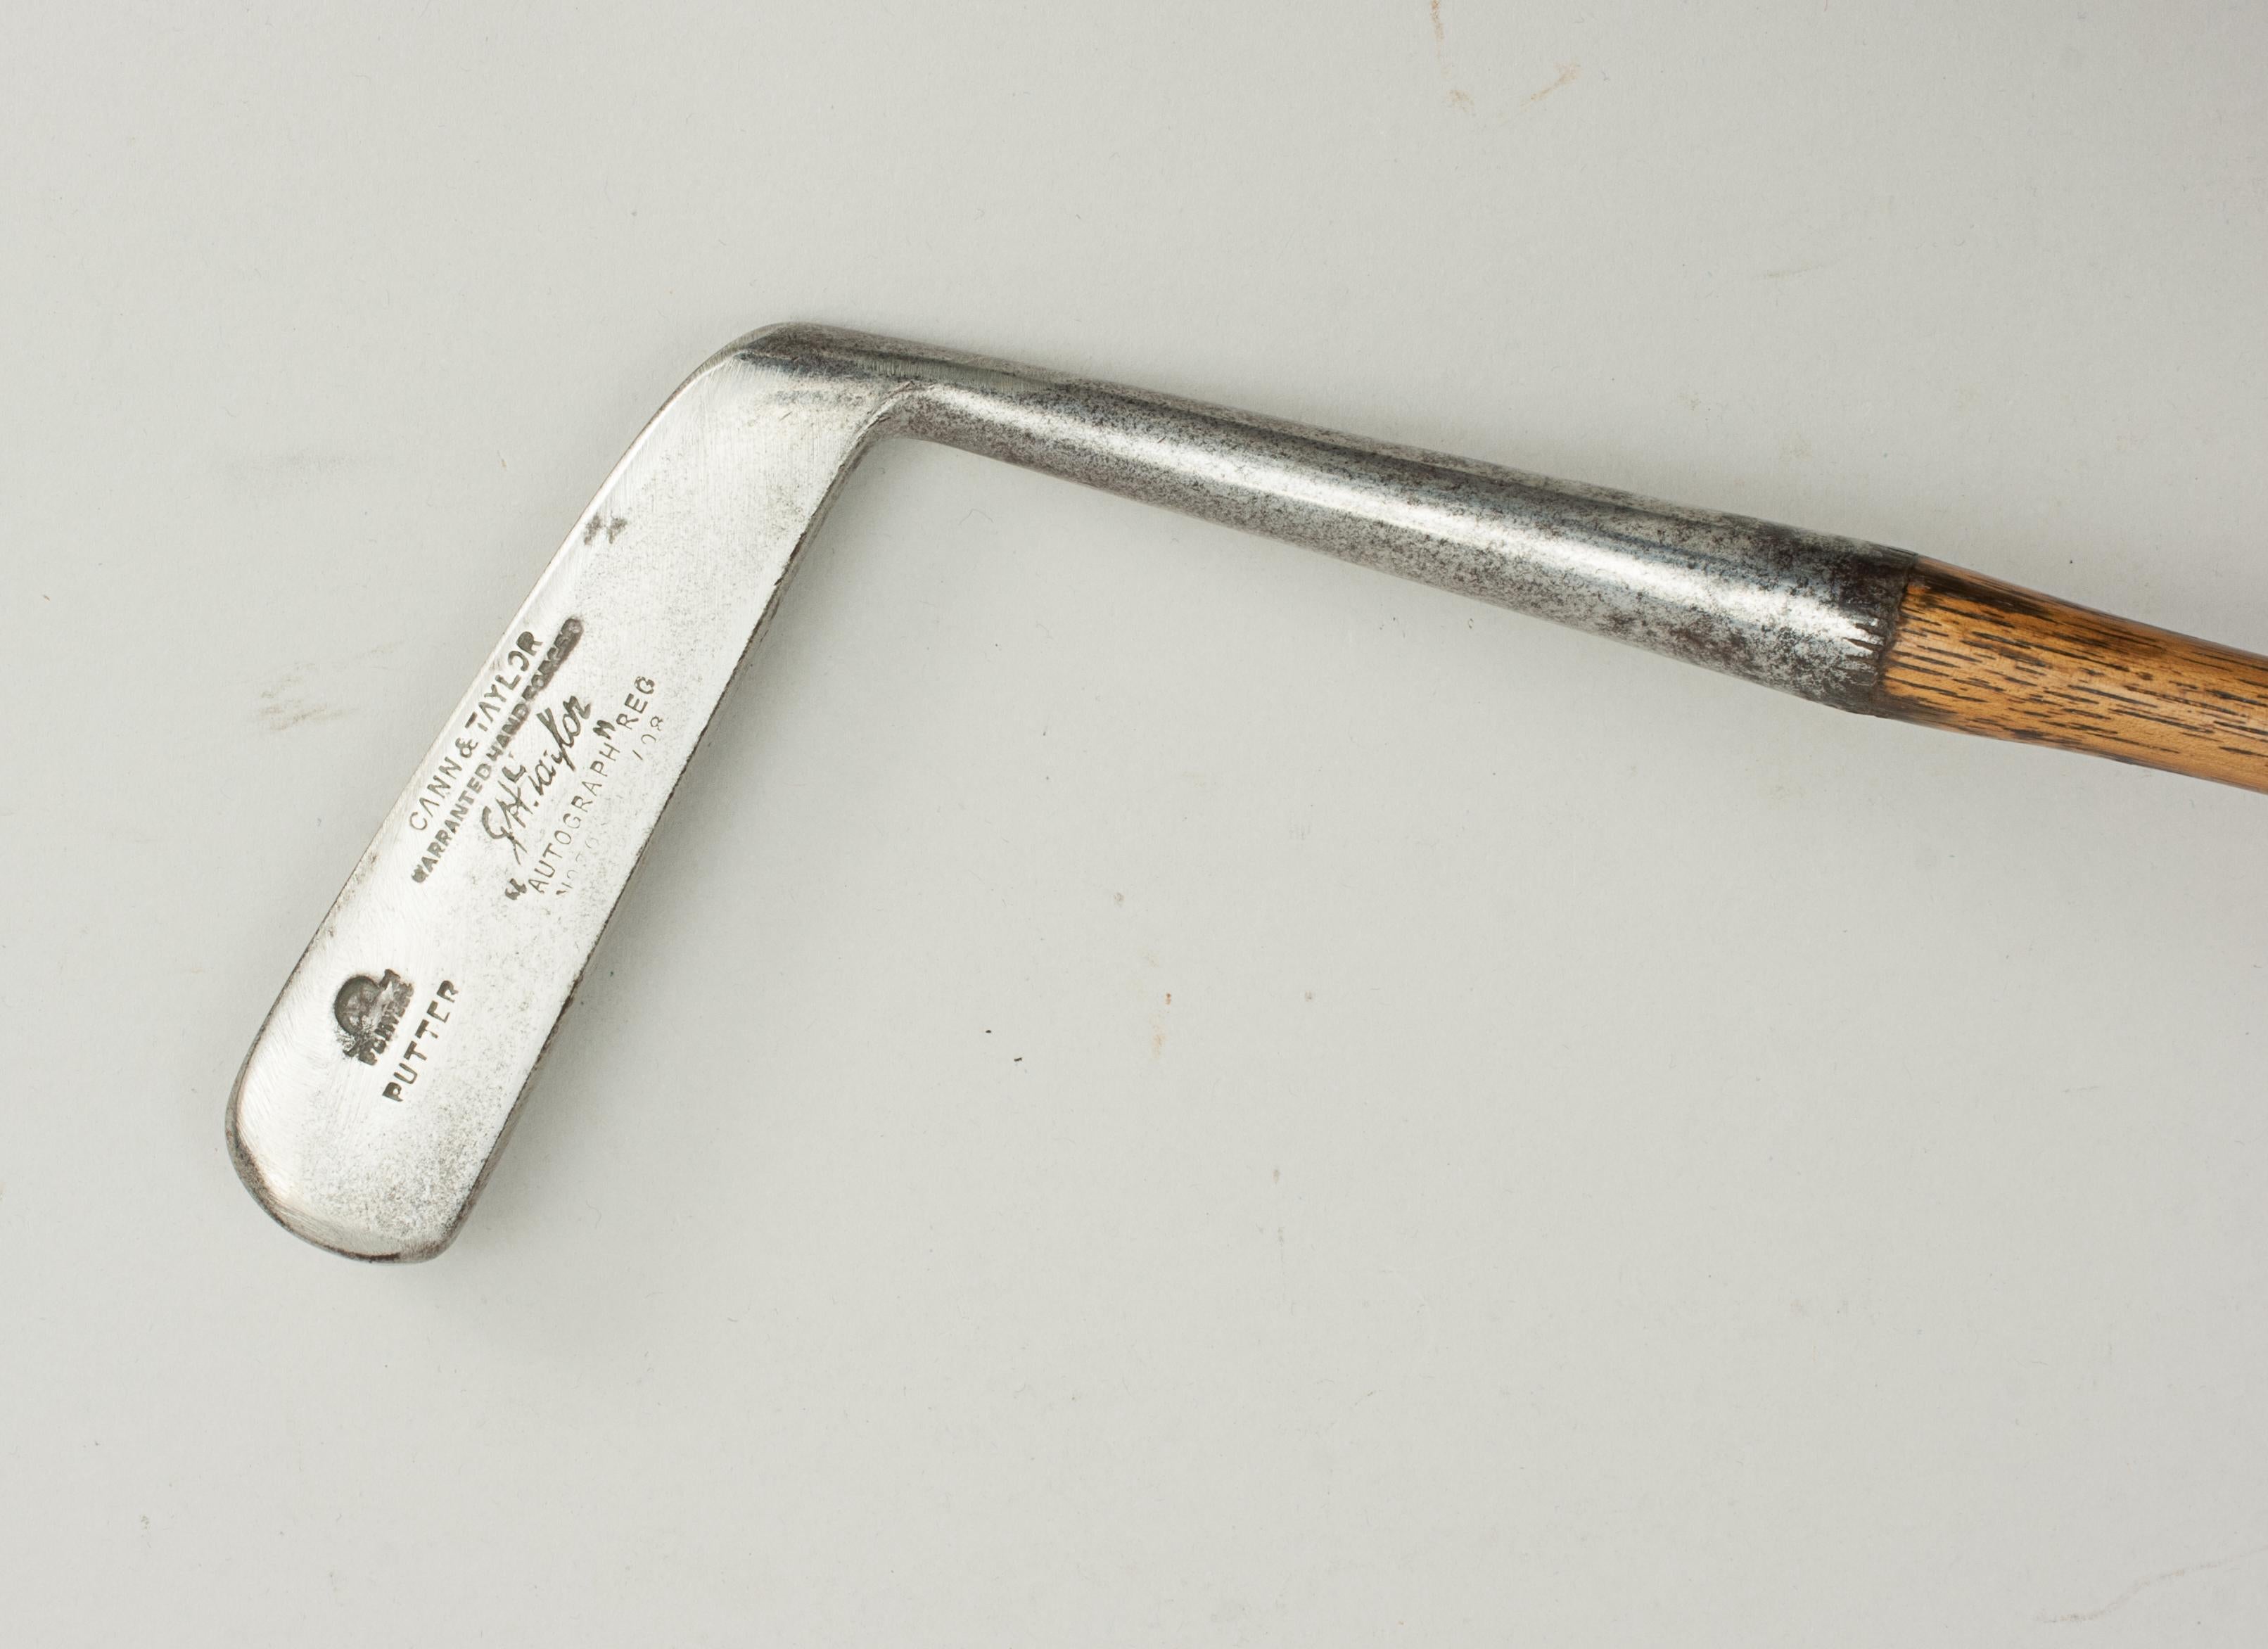 Vintage Golf Club, Putter by Cann & Taylor with J.h Taylor Autograph 1